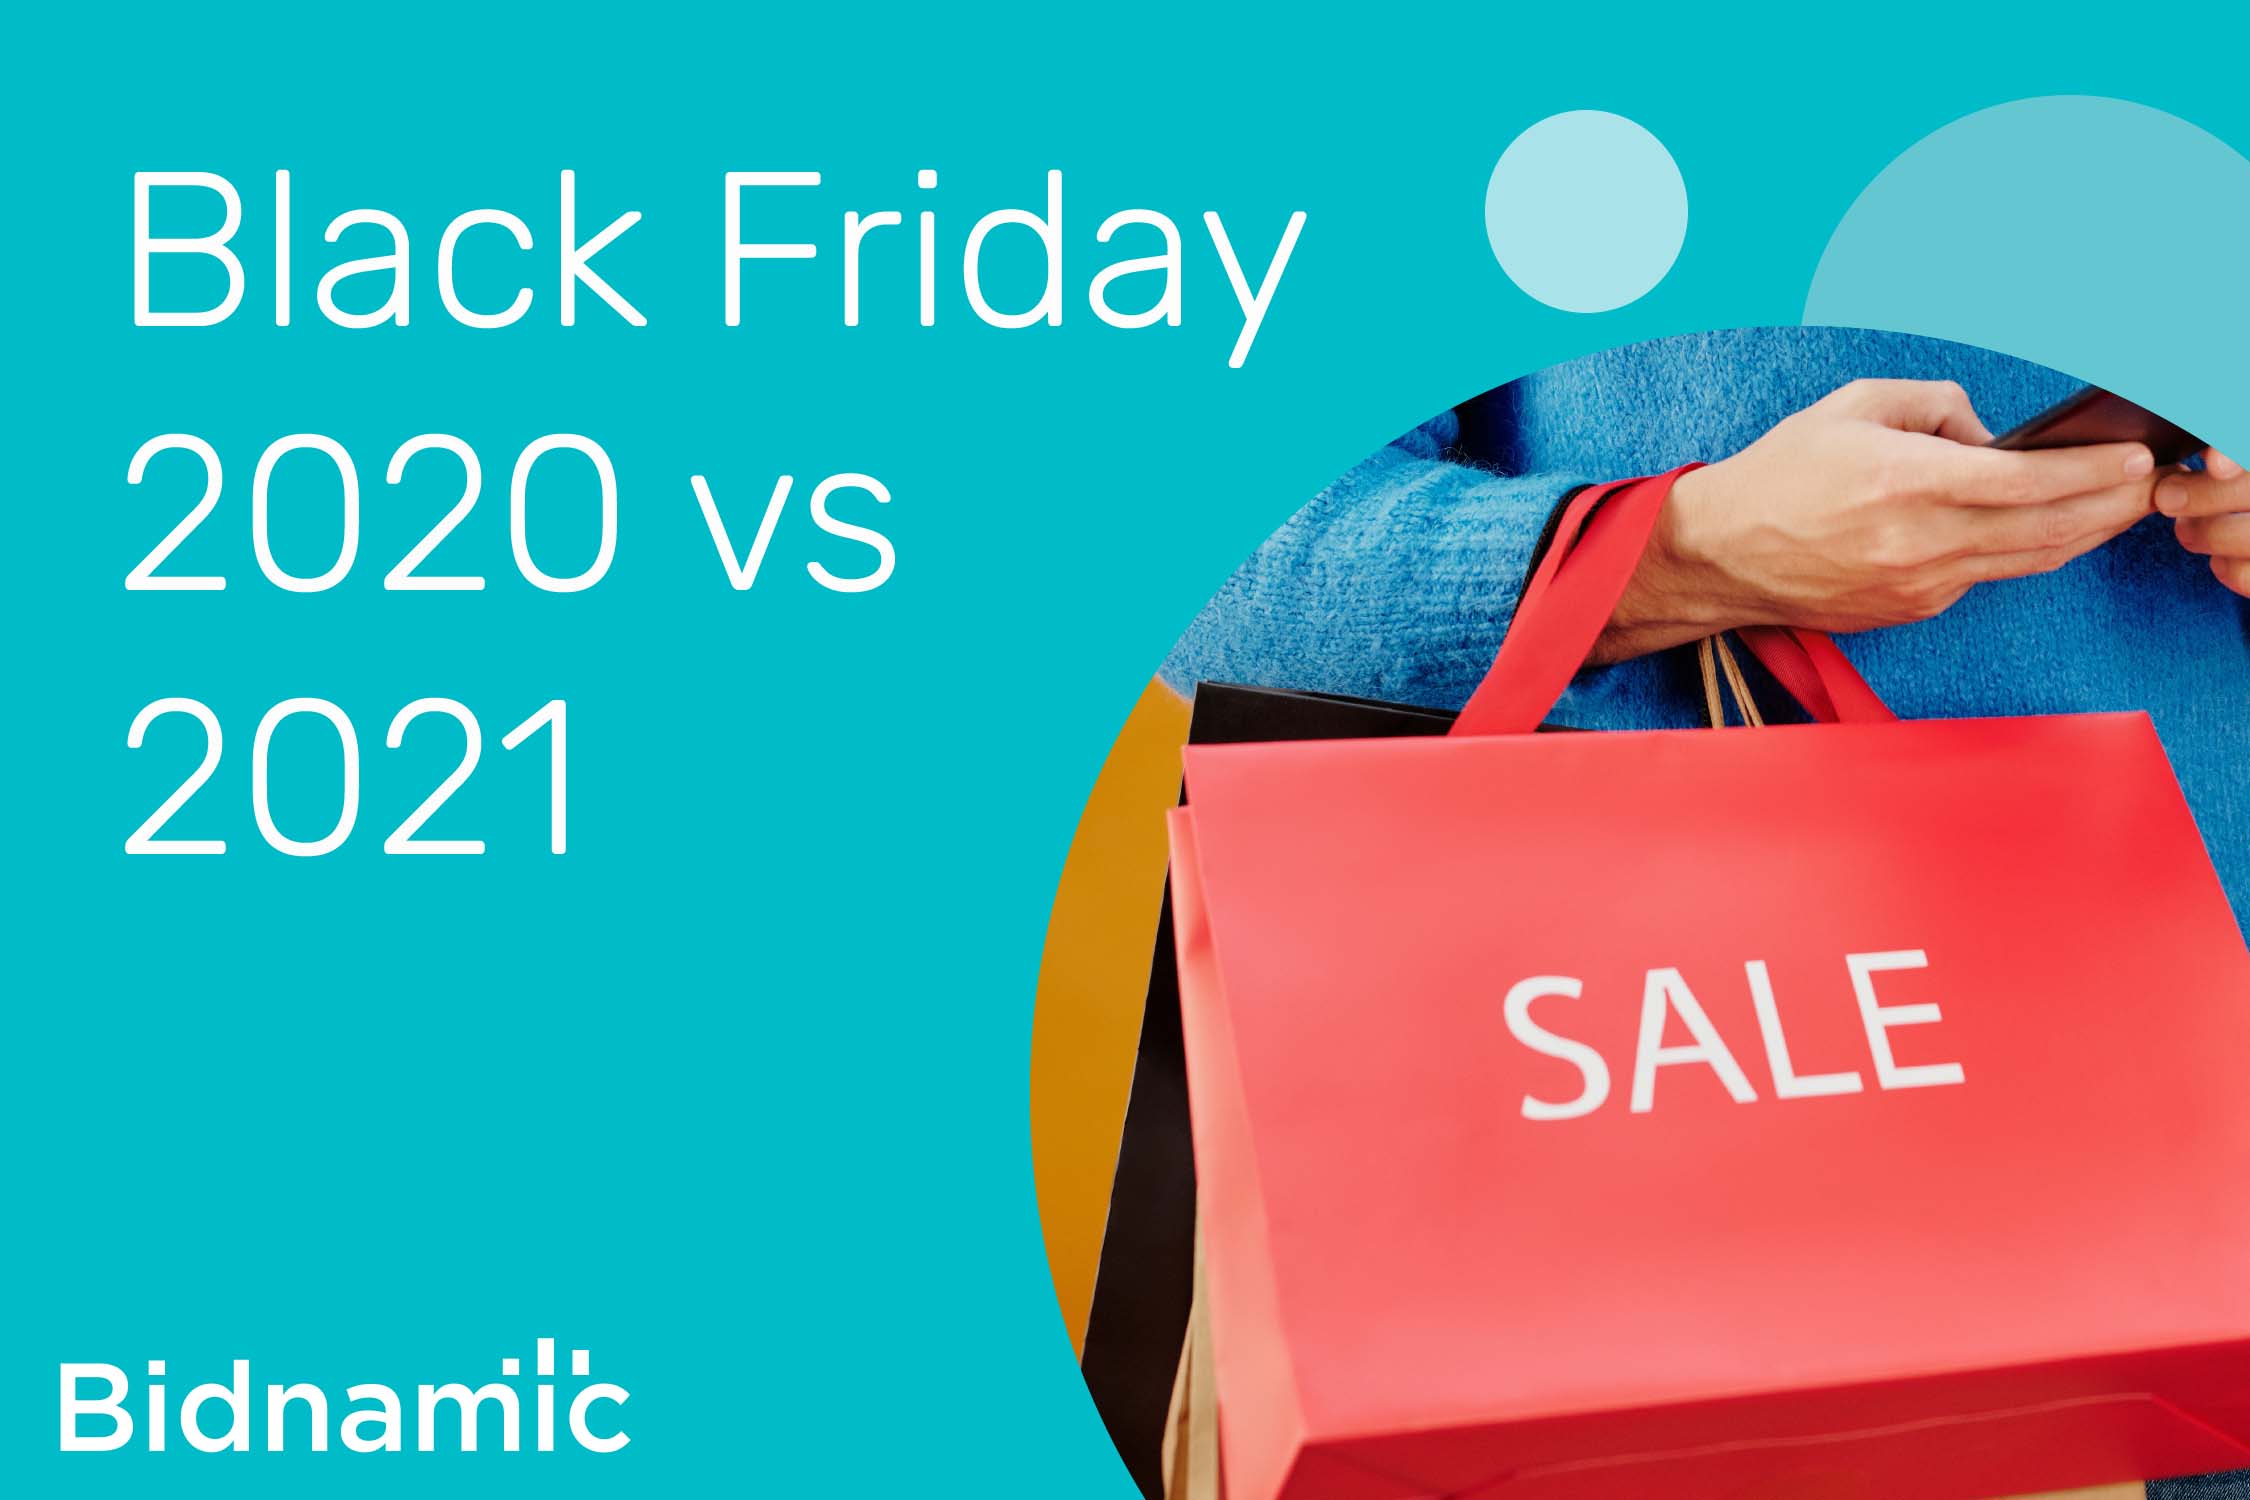 How our clients beat their Black Friday 2020 performance in 2021